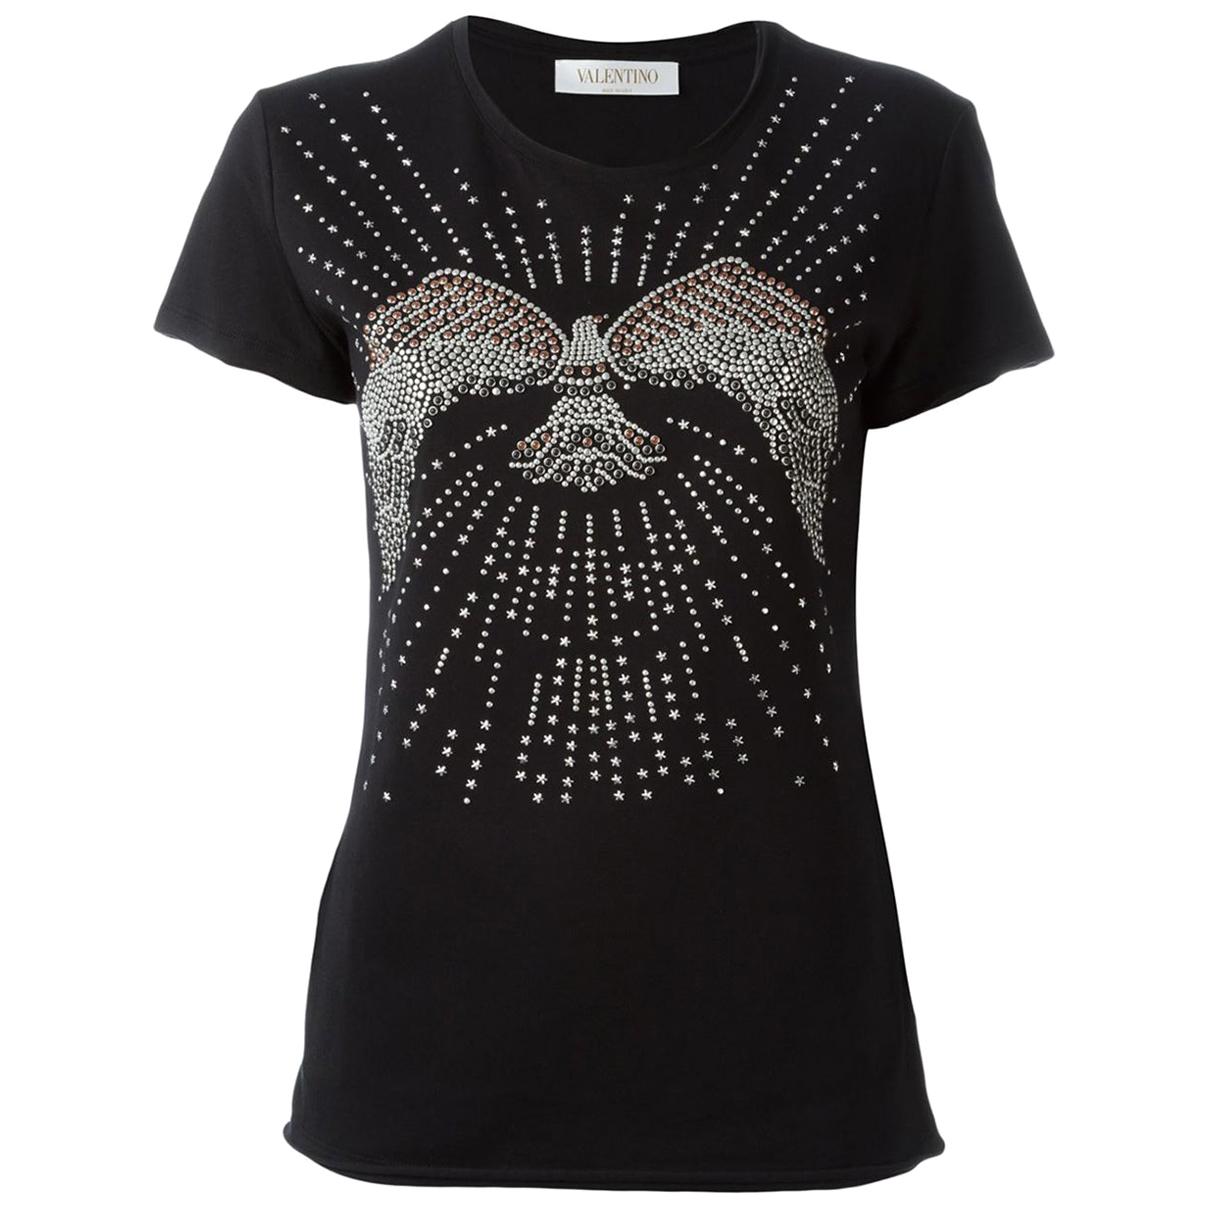 Valentino Stud-Embellished Cotton-Jersey Top